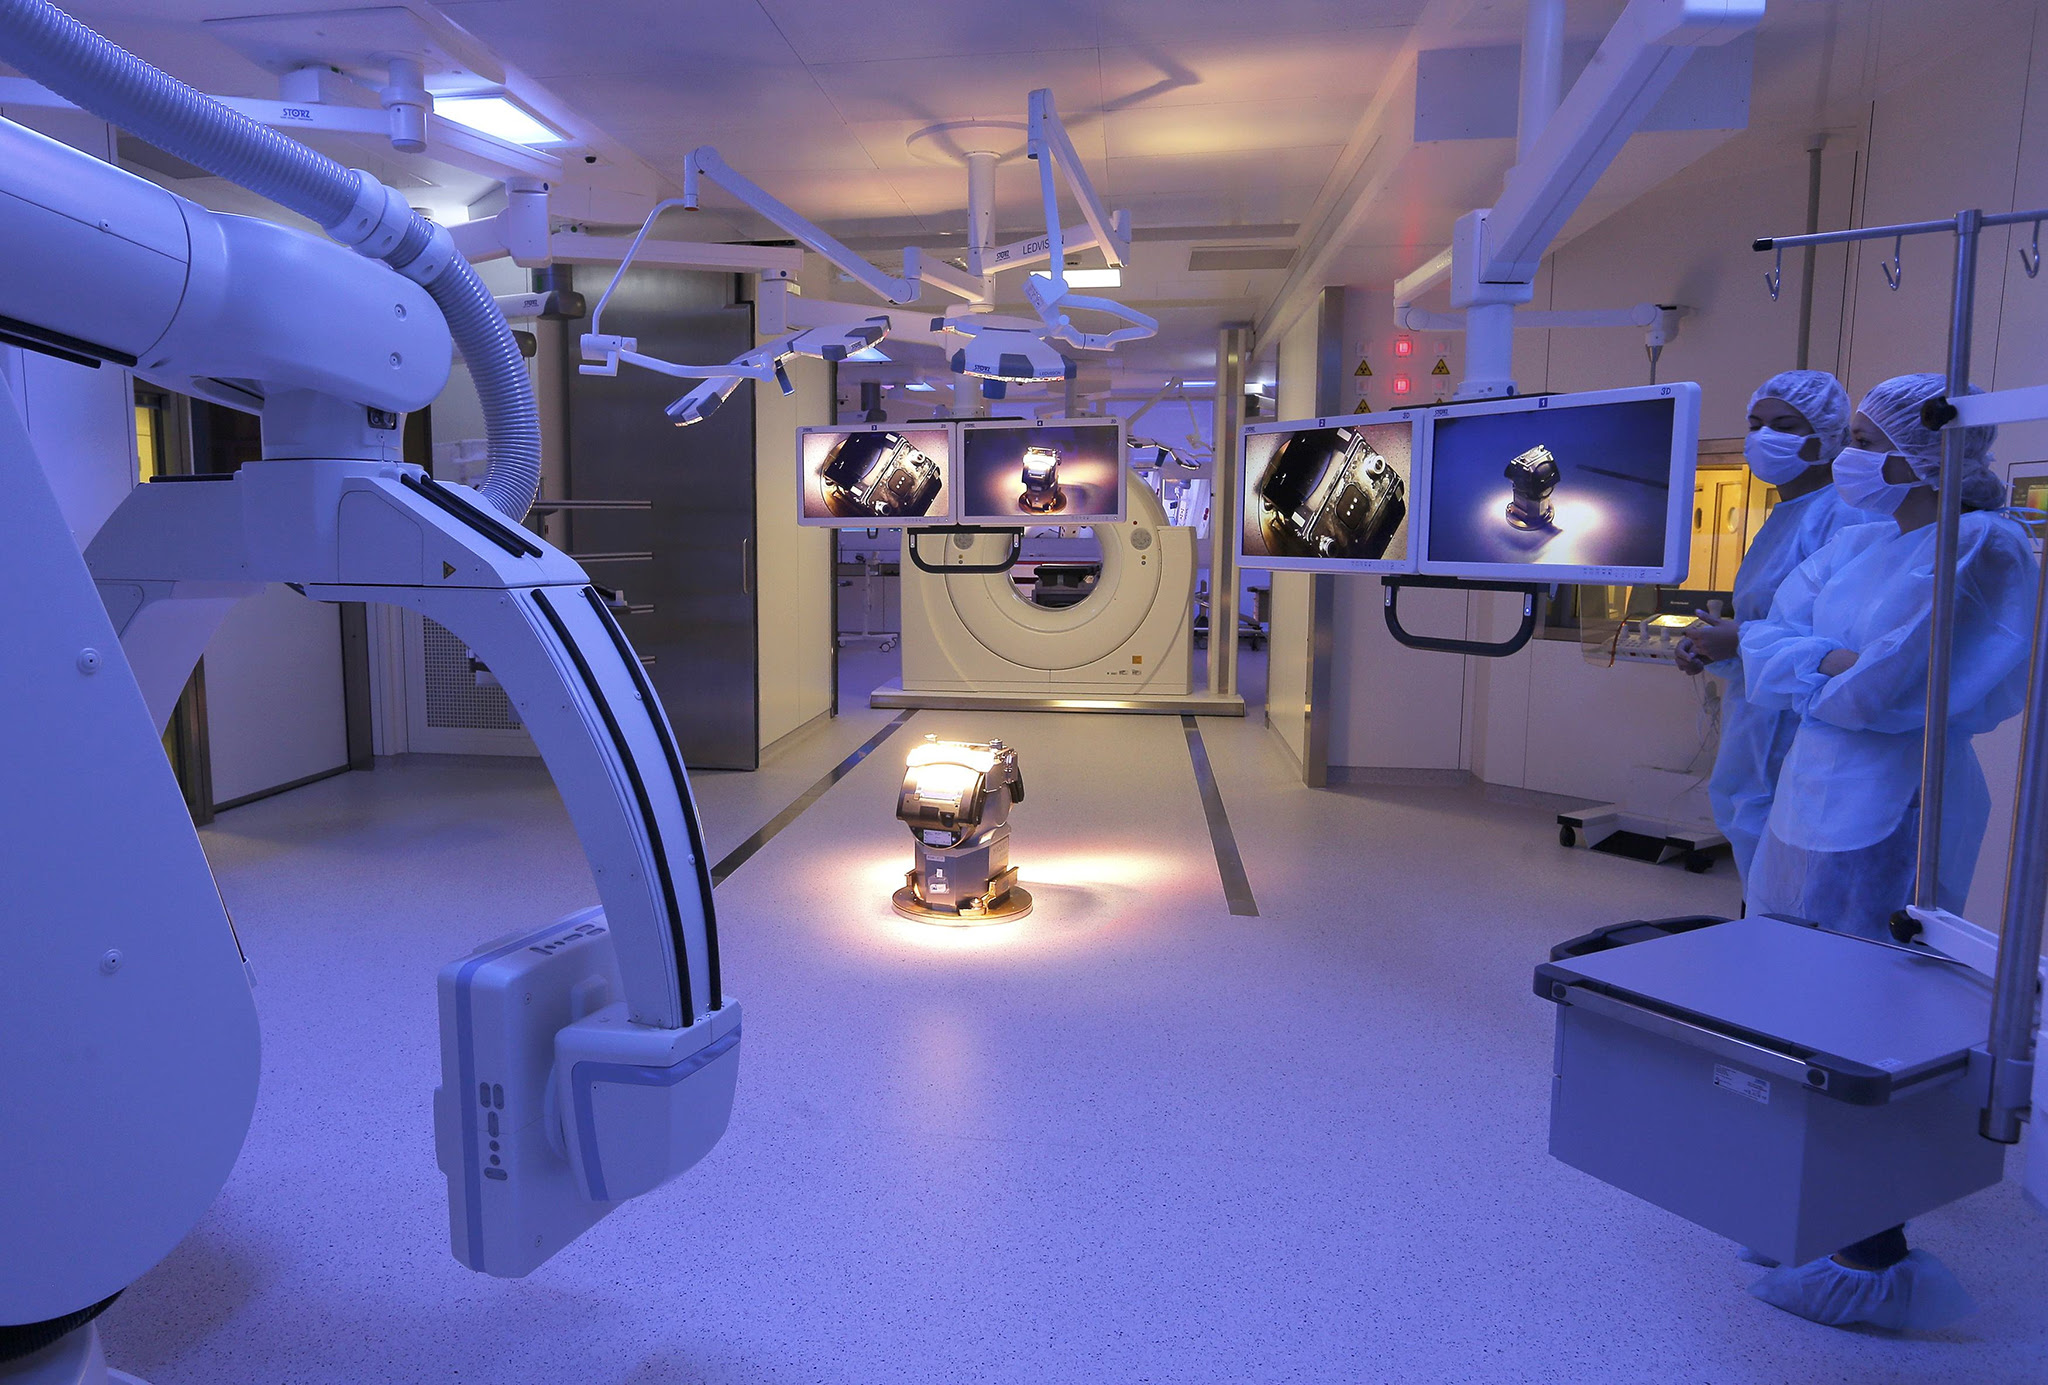 Technicians visit a new hybrid operating room of the IHU, Institute of Image-Guided Surgery in Strasbourg, France, September 29, 2016. The hybrid operation room of the IHU combines the most advanced minimally invasive surgery techniques and the latest medical imaging technologies, resulting in the most advanced surgery platform of the world. Picture taken September 29, 2016.  REUTERS/Vincent Kessler